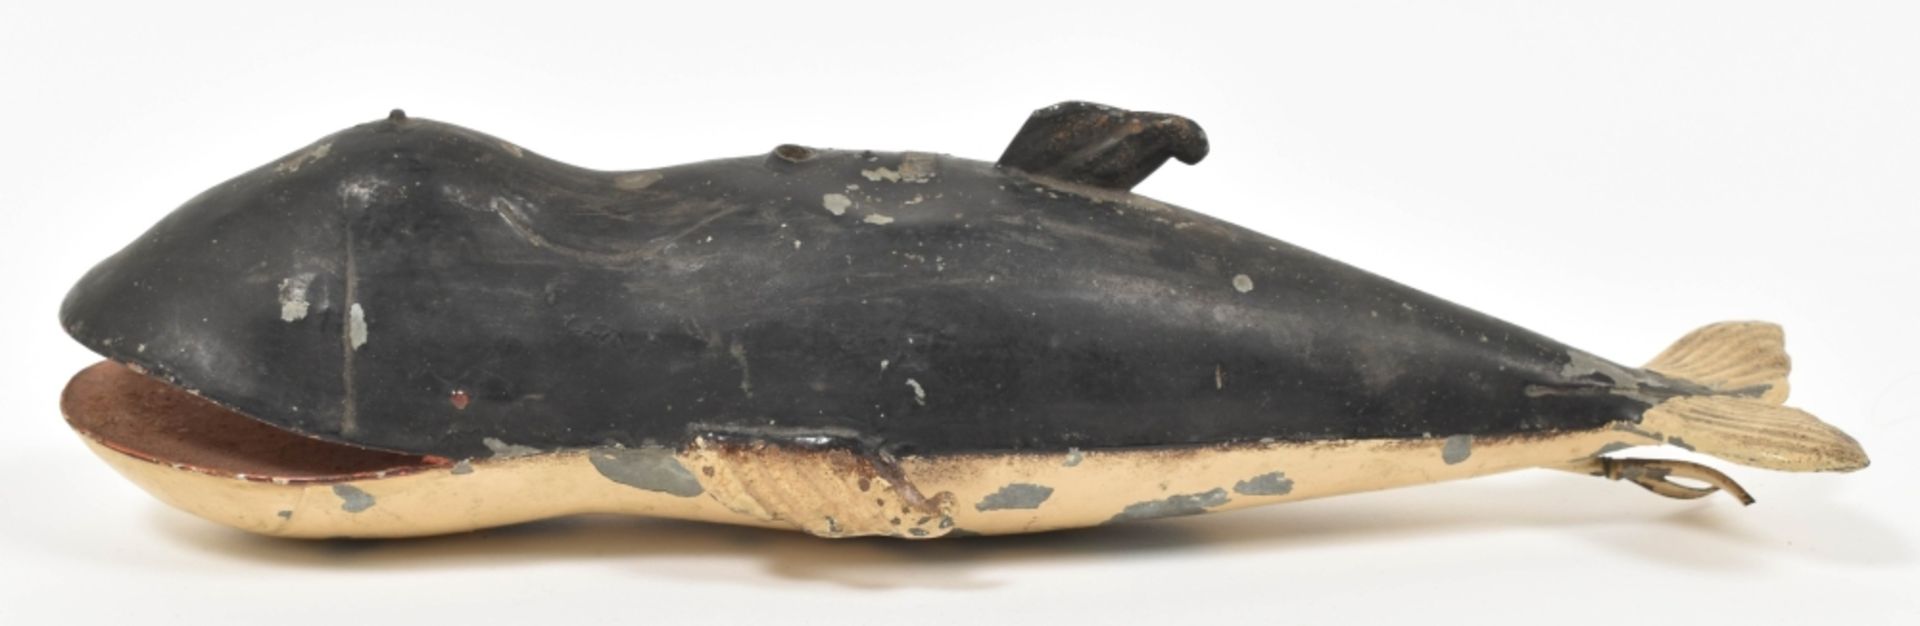 Toy tin whale - Image 7 of 7